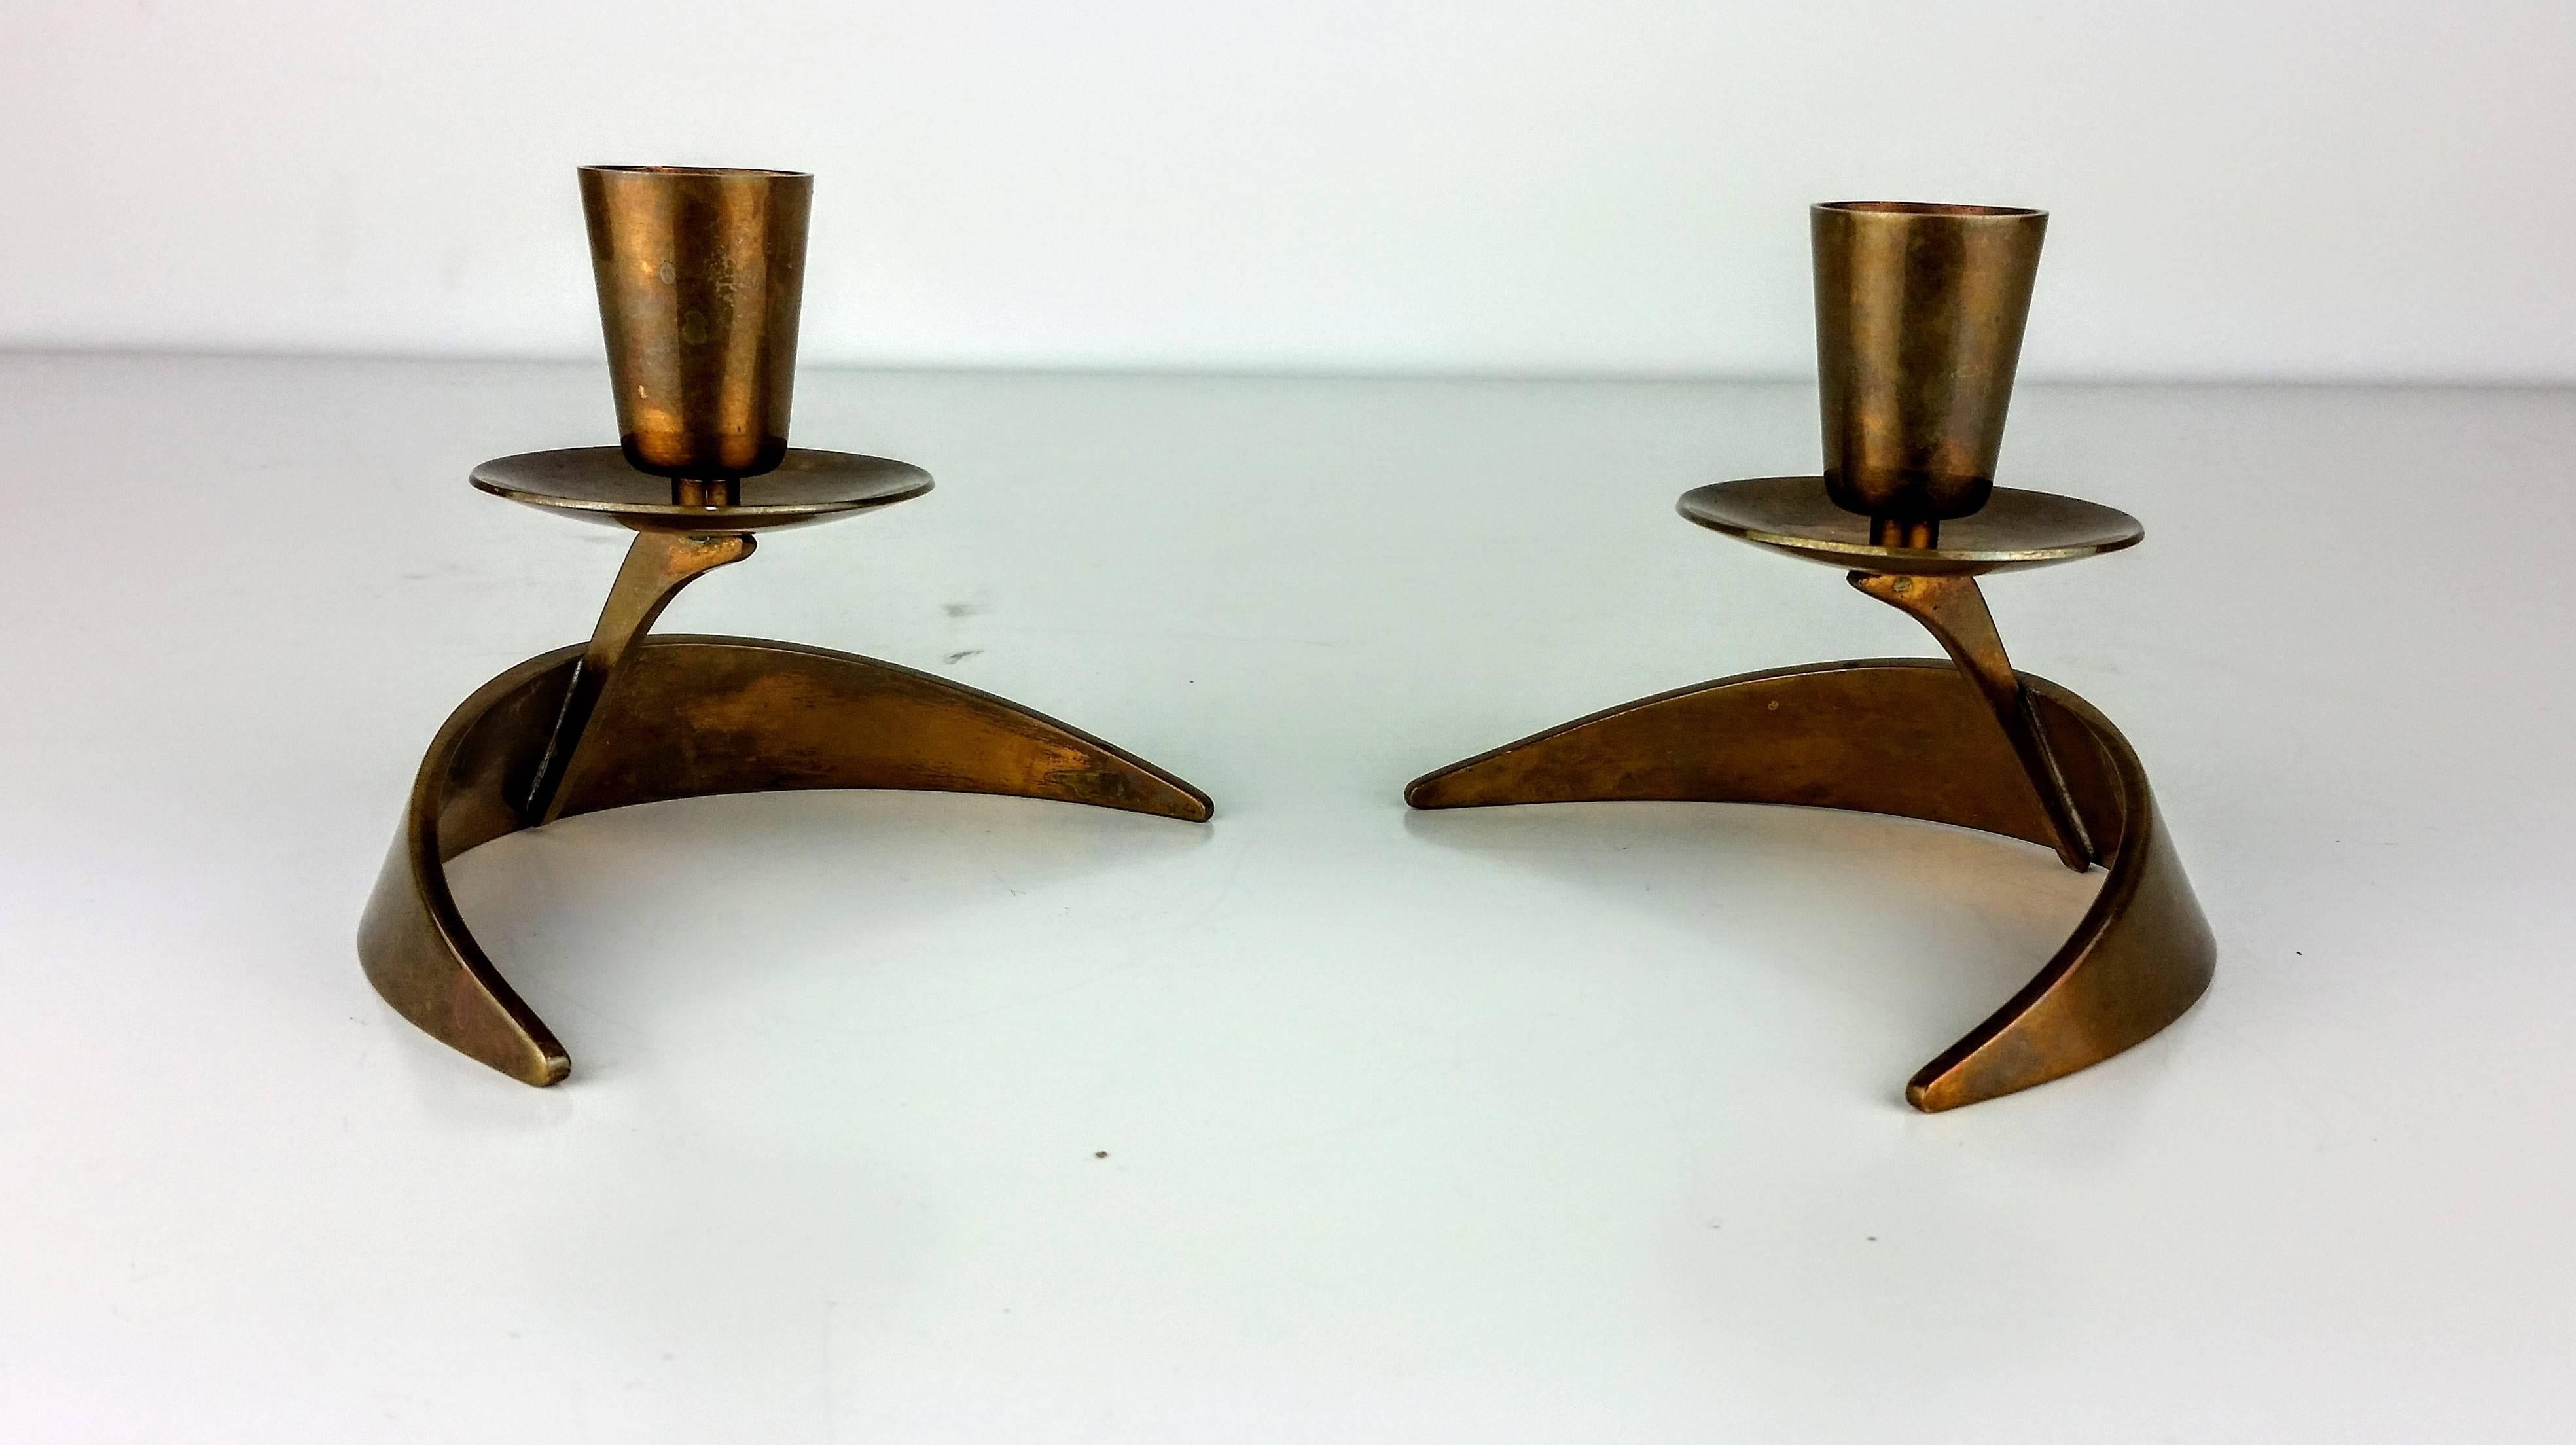 American Rare Modernist Candle Holders in Solid Bronze by John Prip and Ronald Pearson